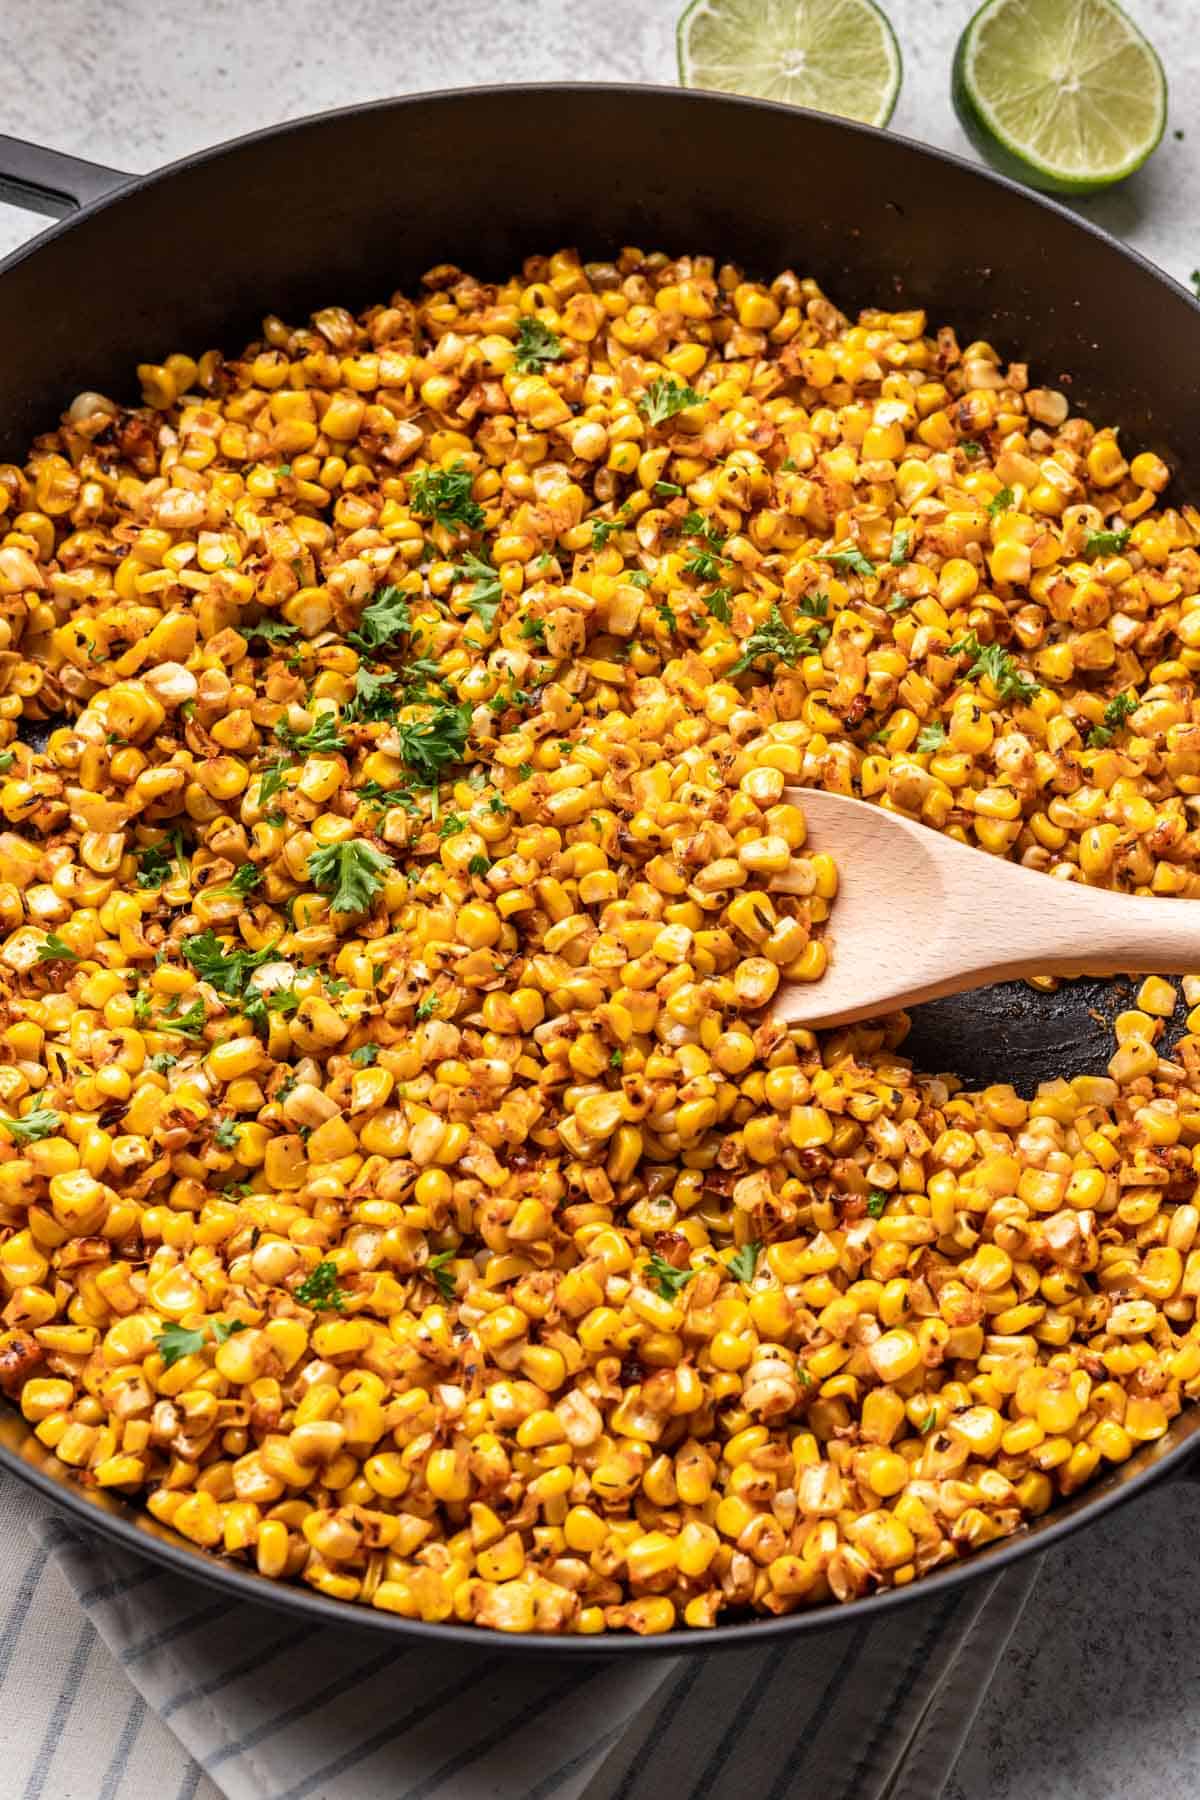 Blackened corn in a skillet with a wooden spoon.